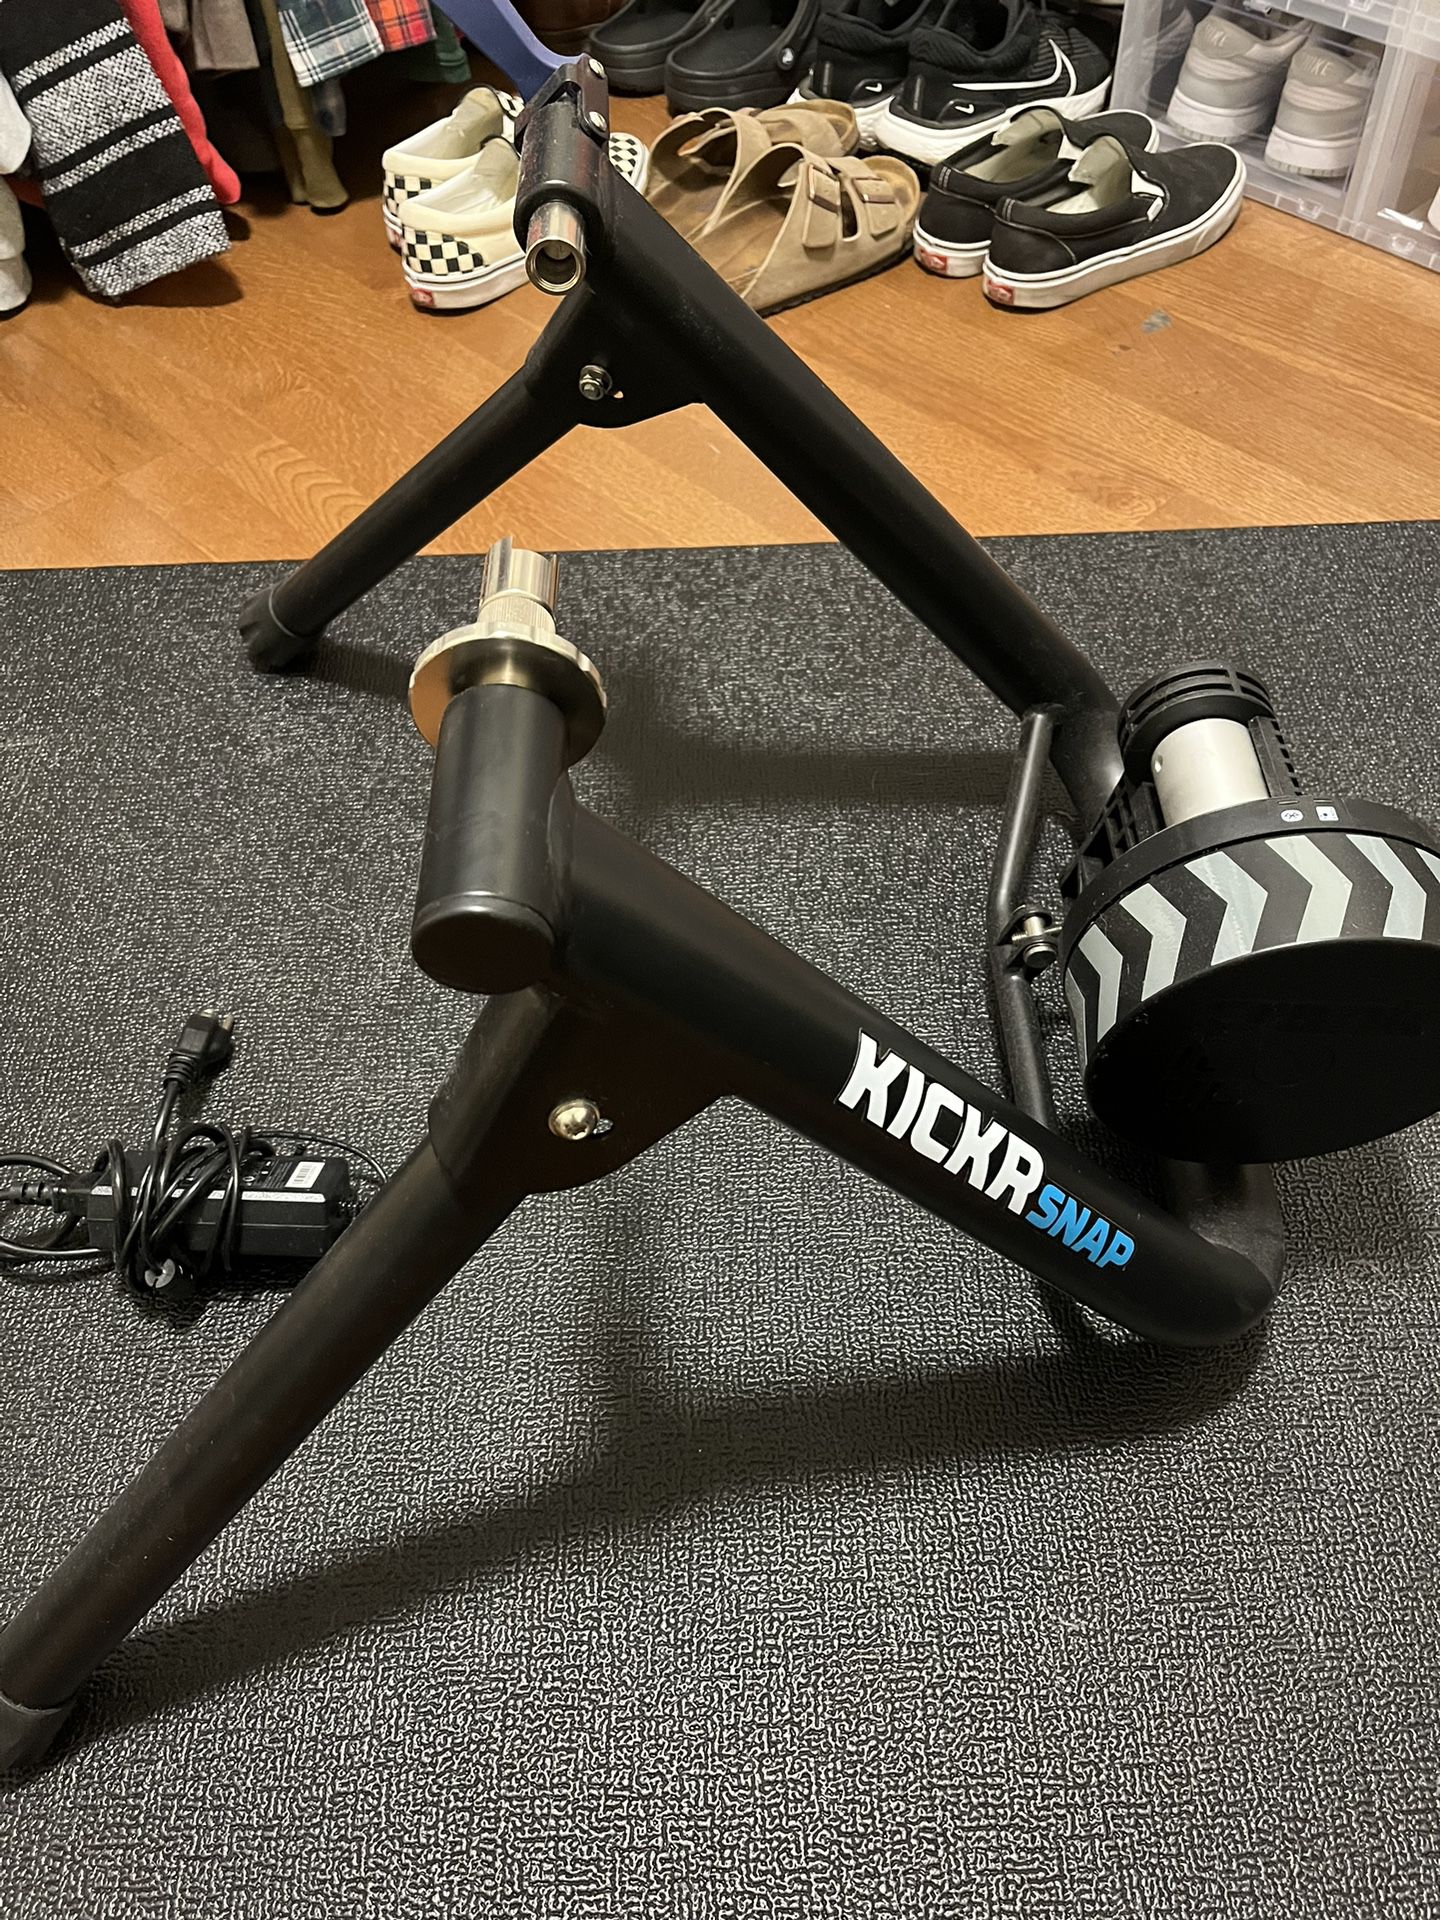 Kickr Snap - Indoor Cycling Trainer 